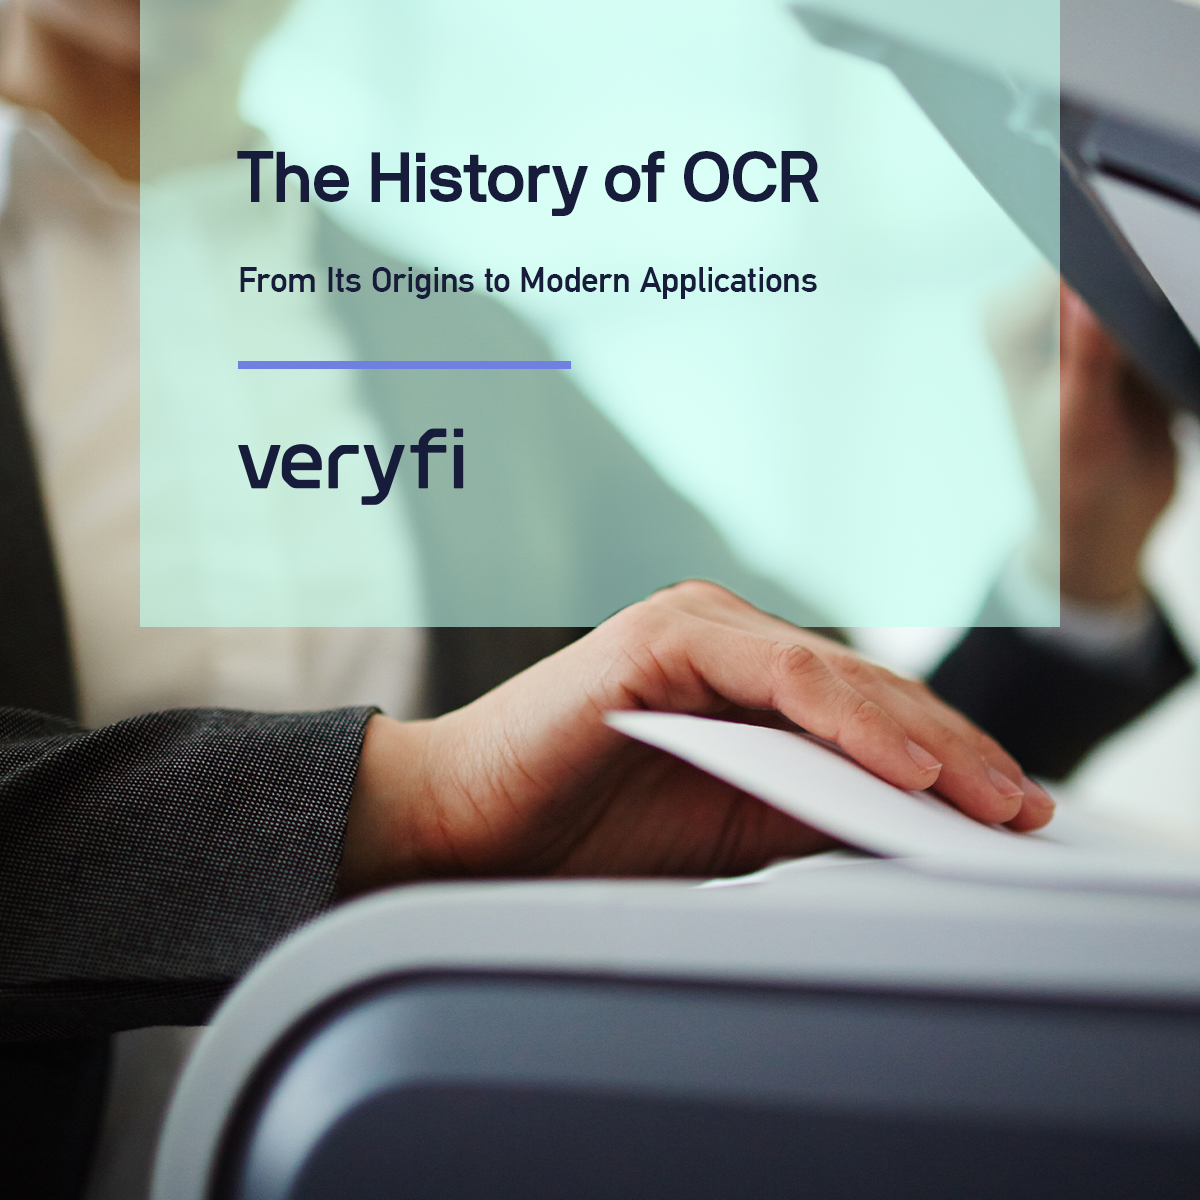 The History of OCR